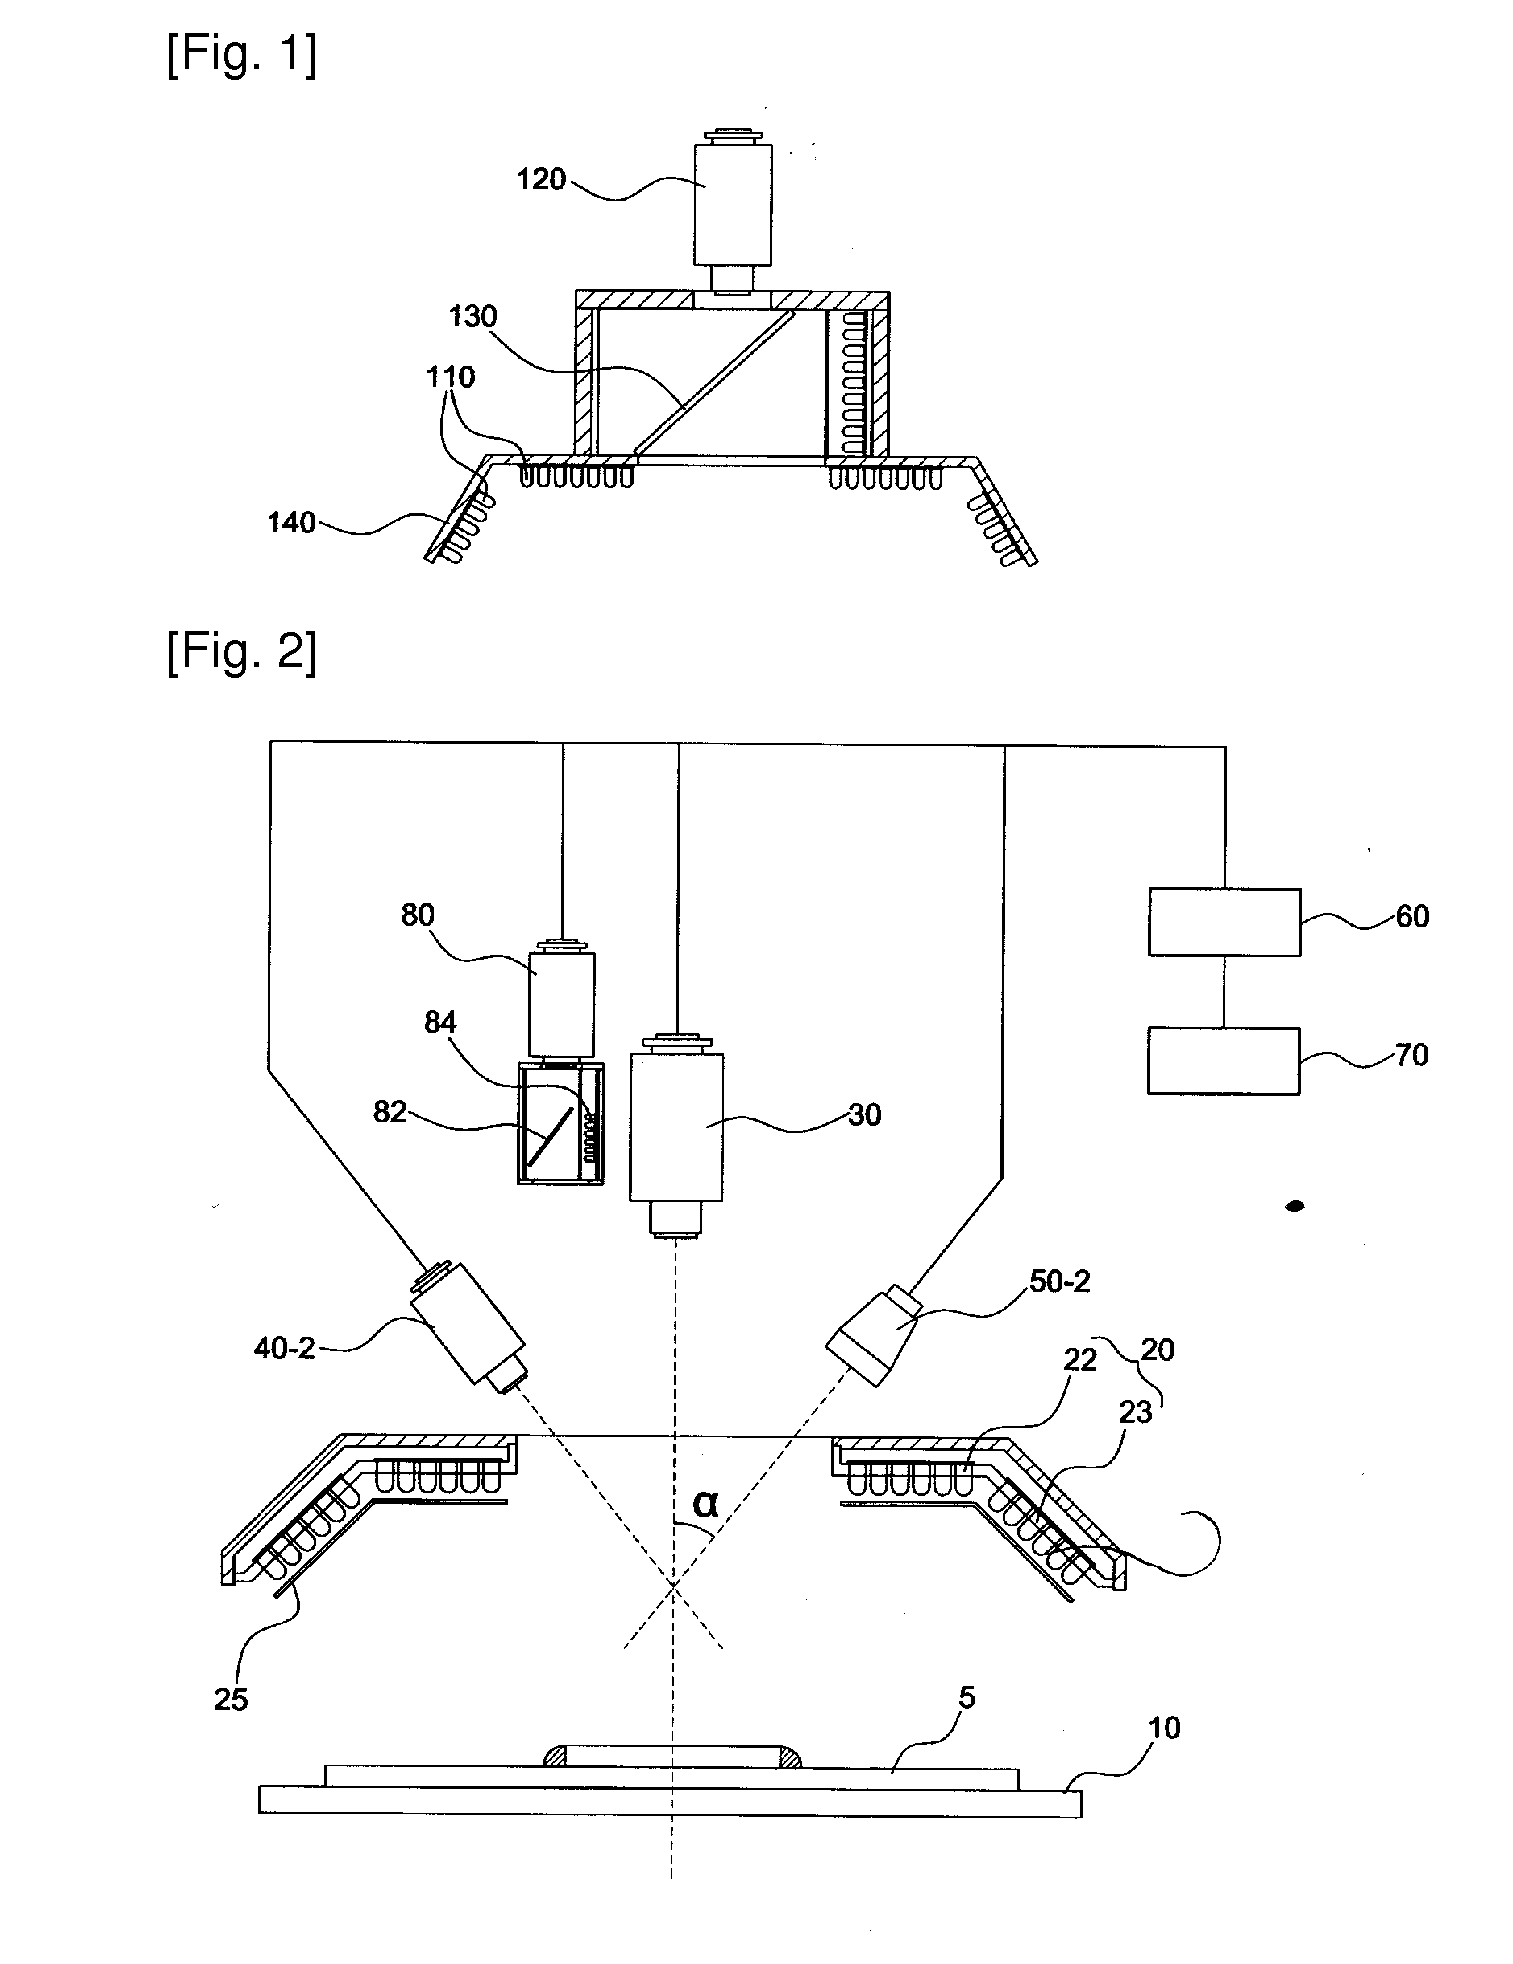 Vision testing device with enhanced image clarity